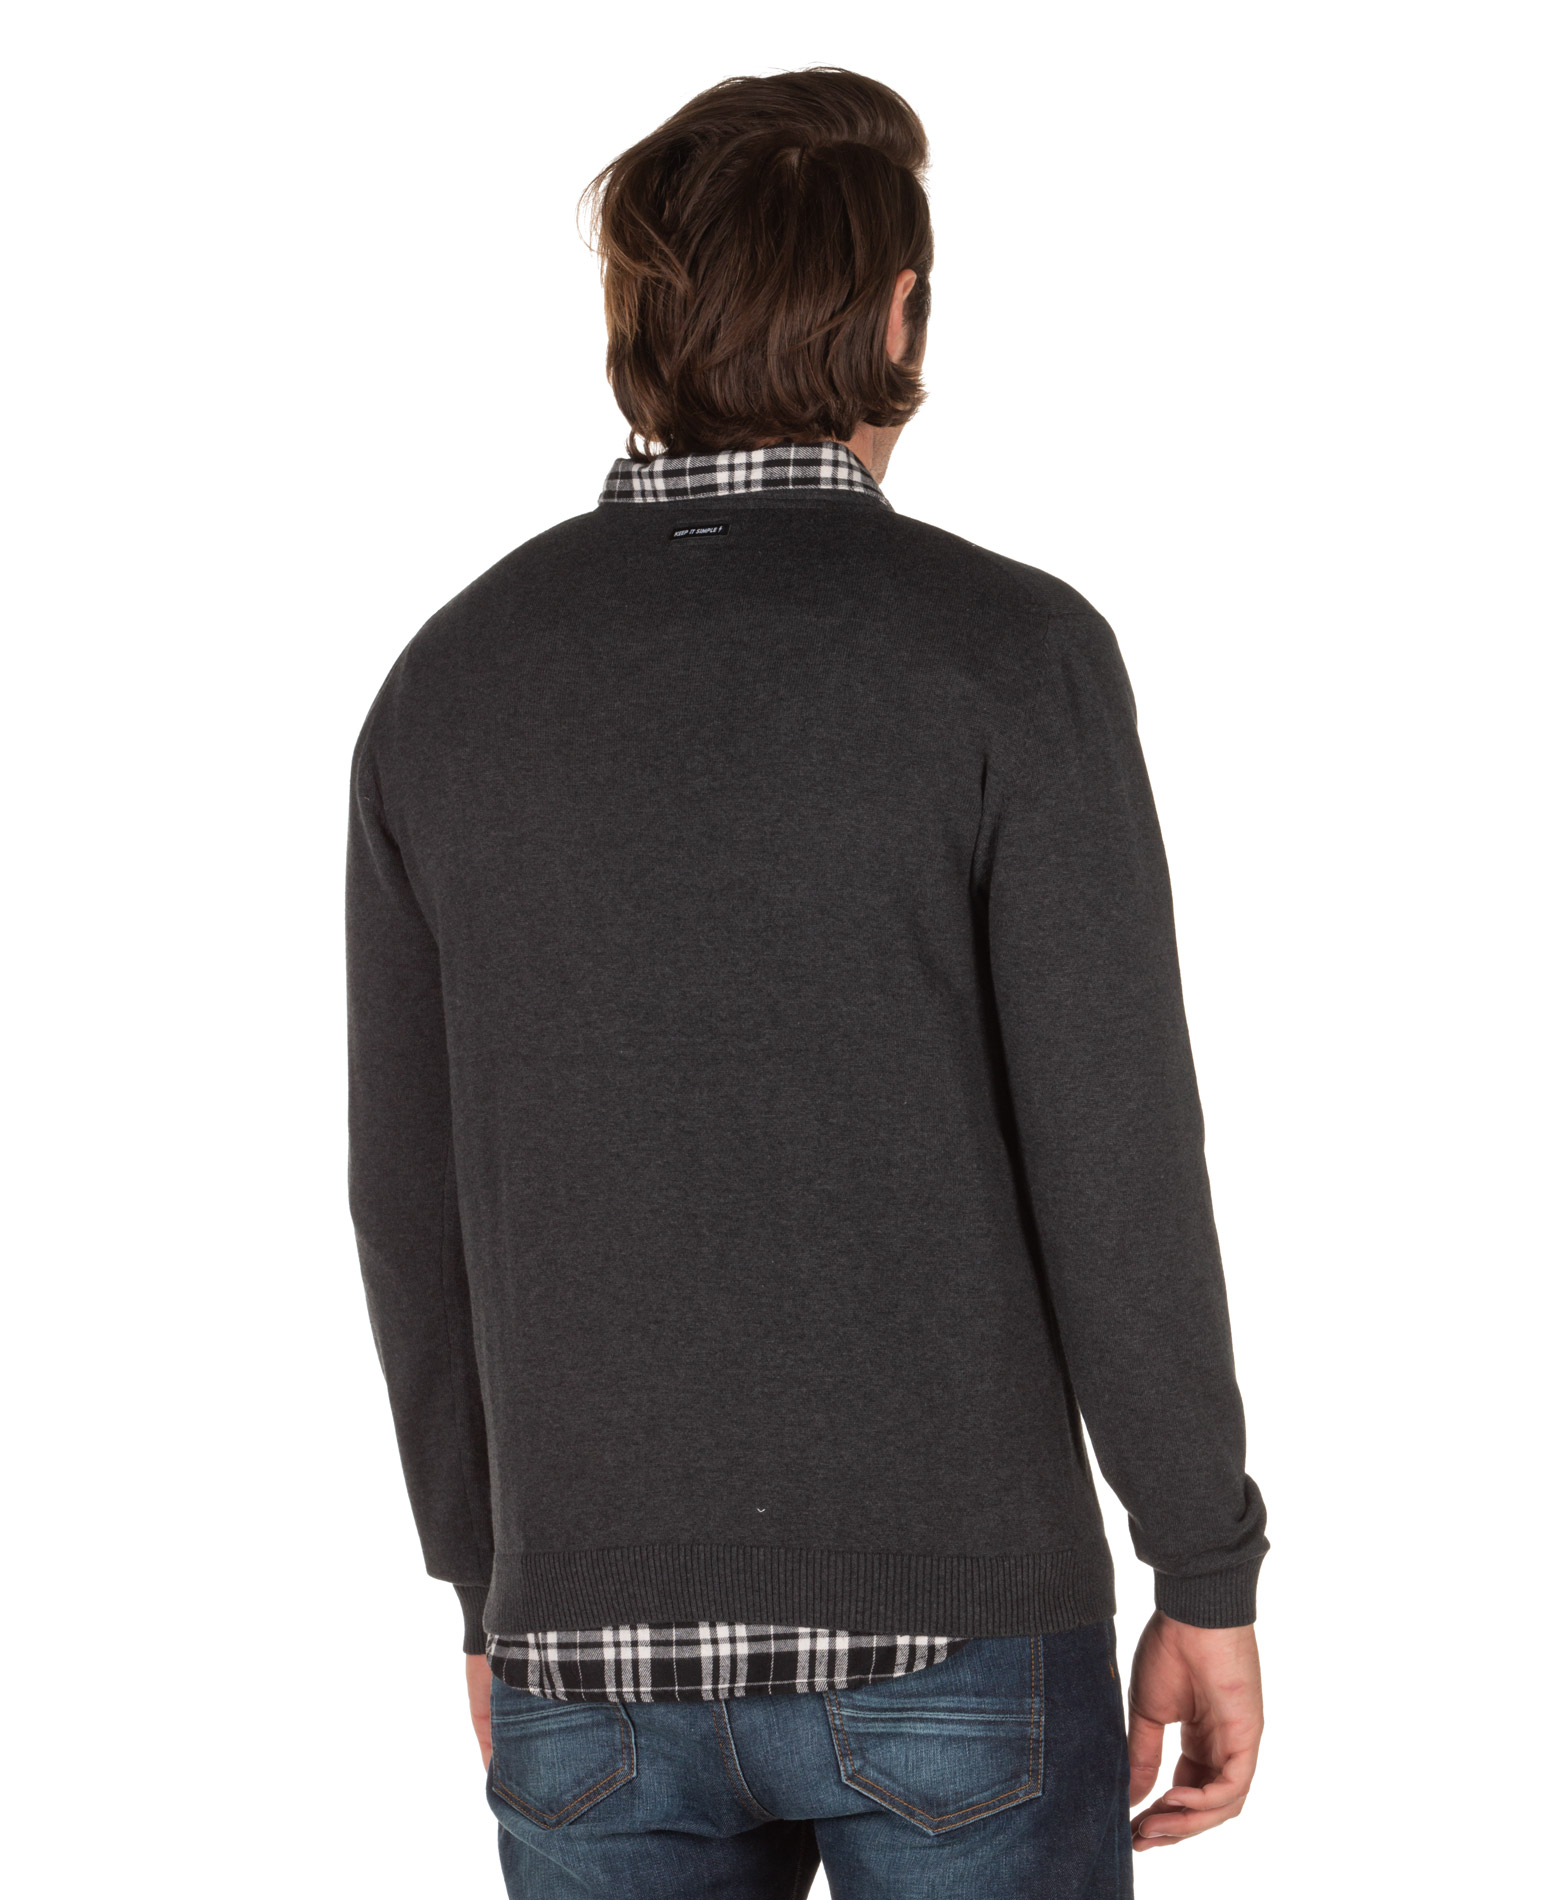 EMERSON COTTON KNITTED SWEATER 192.EM70.90-D.GREY ML Ανθρακί